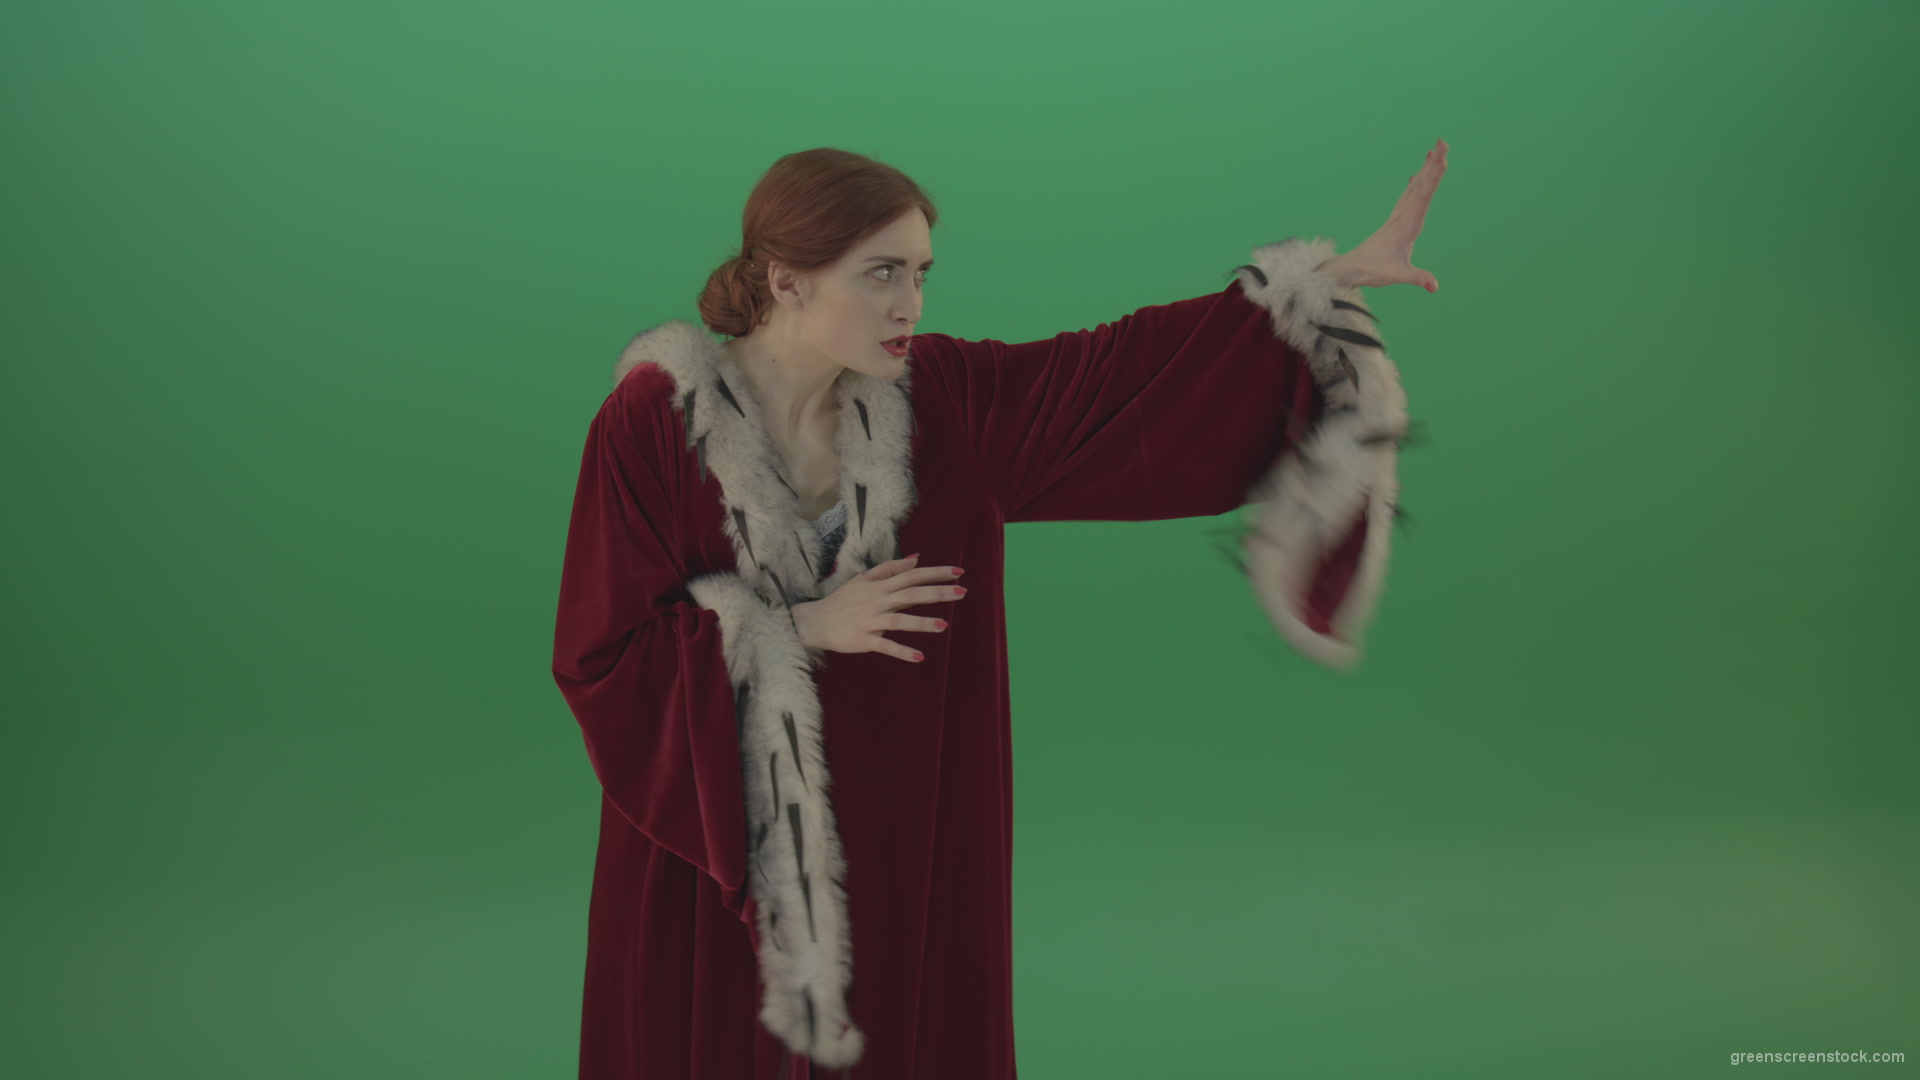 Girl-is-dressed-in-a-red-cloak-shoots-proton-lasers-_002 Green Screen Stock